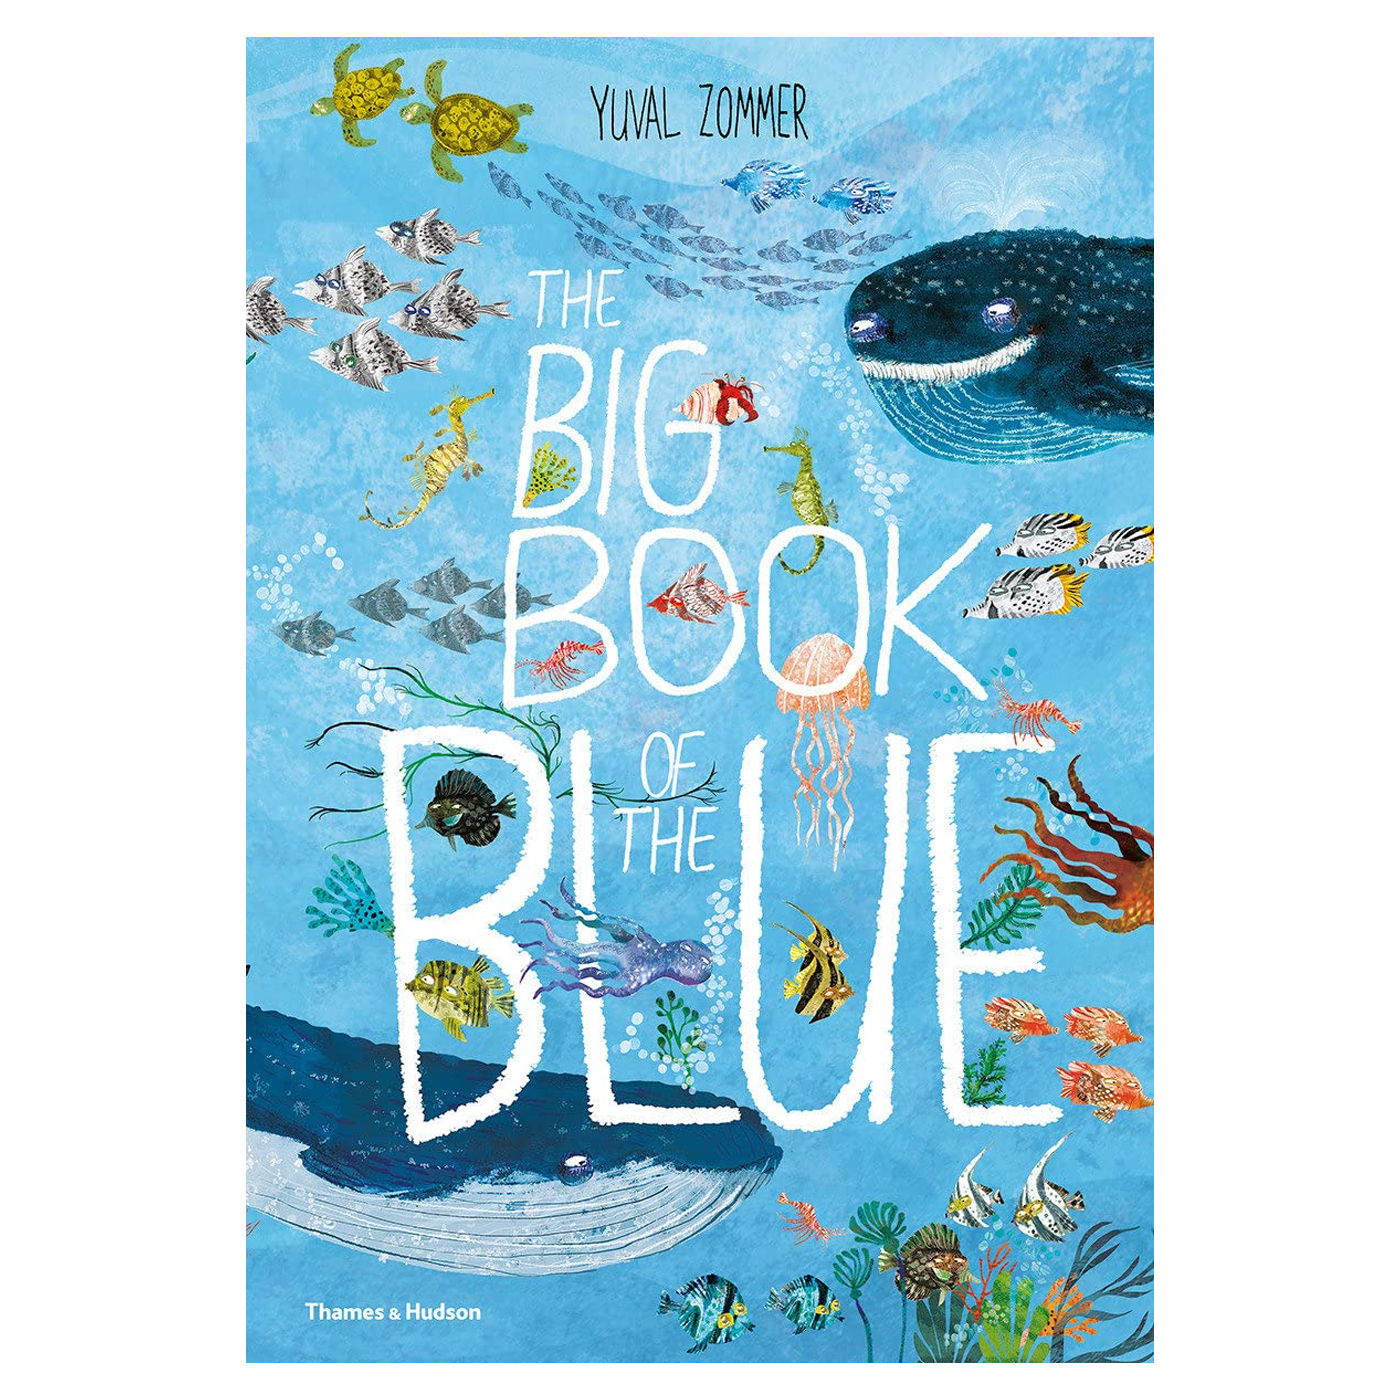  The Big Book of The Blue